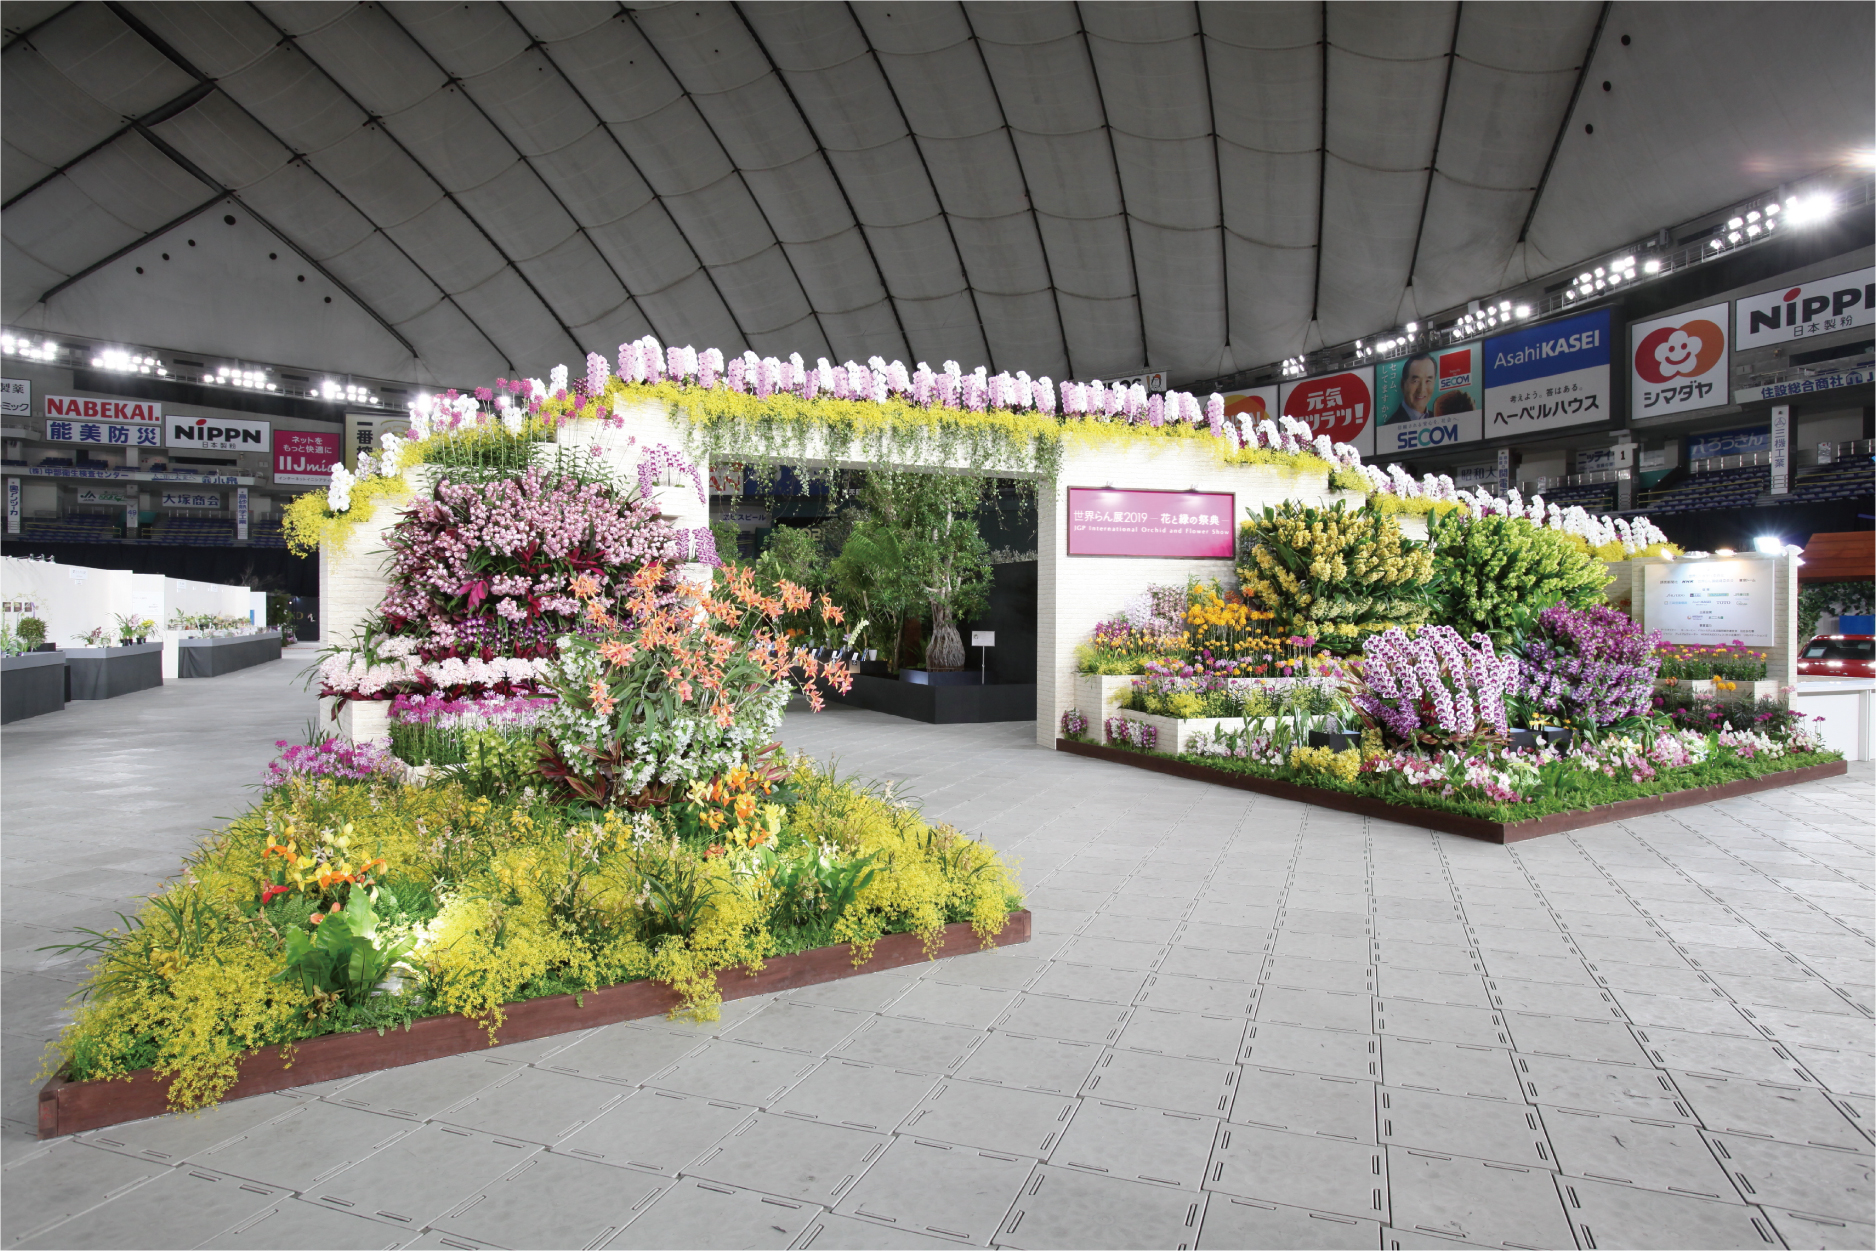 Japan Grand Prix International Orchid and Flower Show 2020 at Tokyo Dome